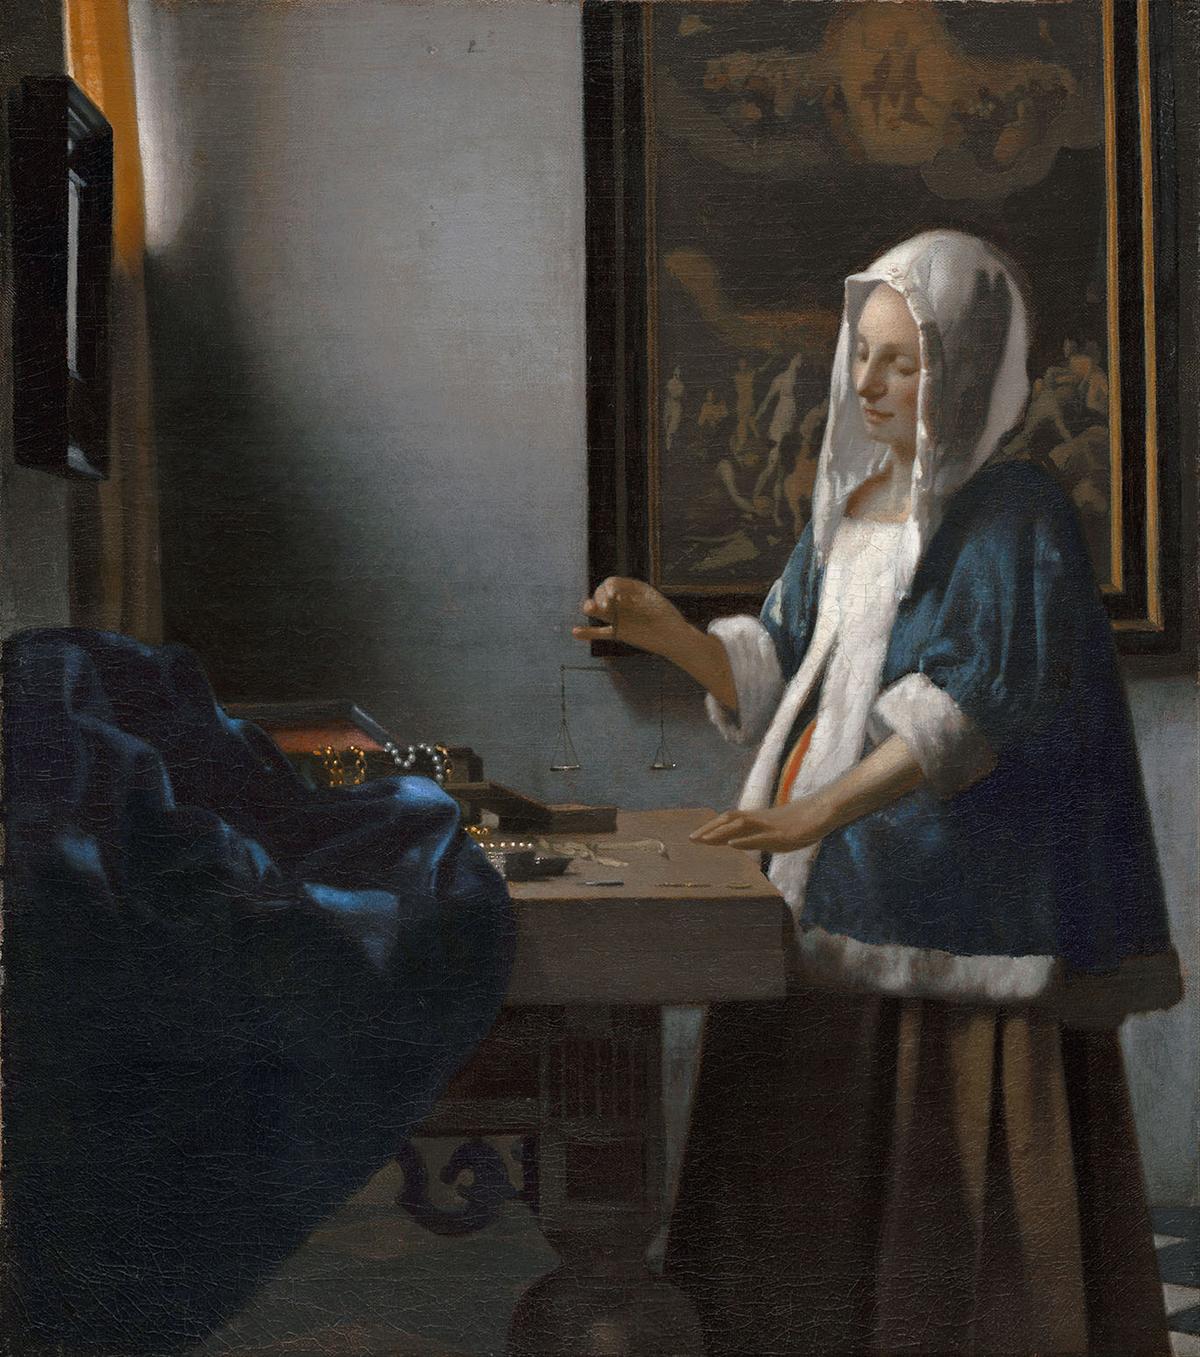 “Woman Holding a Balance,” 1664, by Johannes Vermeer. Oil on canvas; 15 5/8 inches by 14 inches. National Gallery of Art, Washington. (Public Domain)